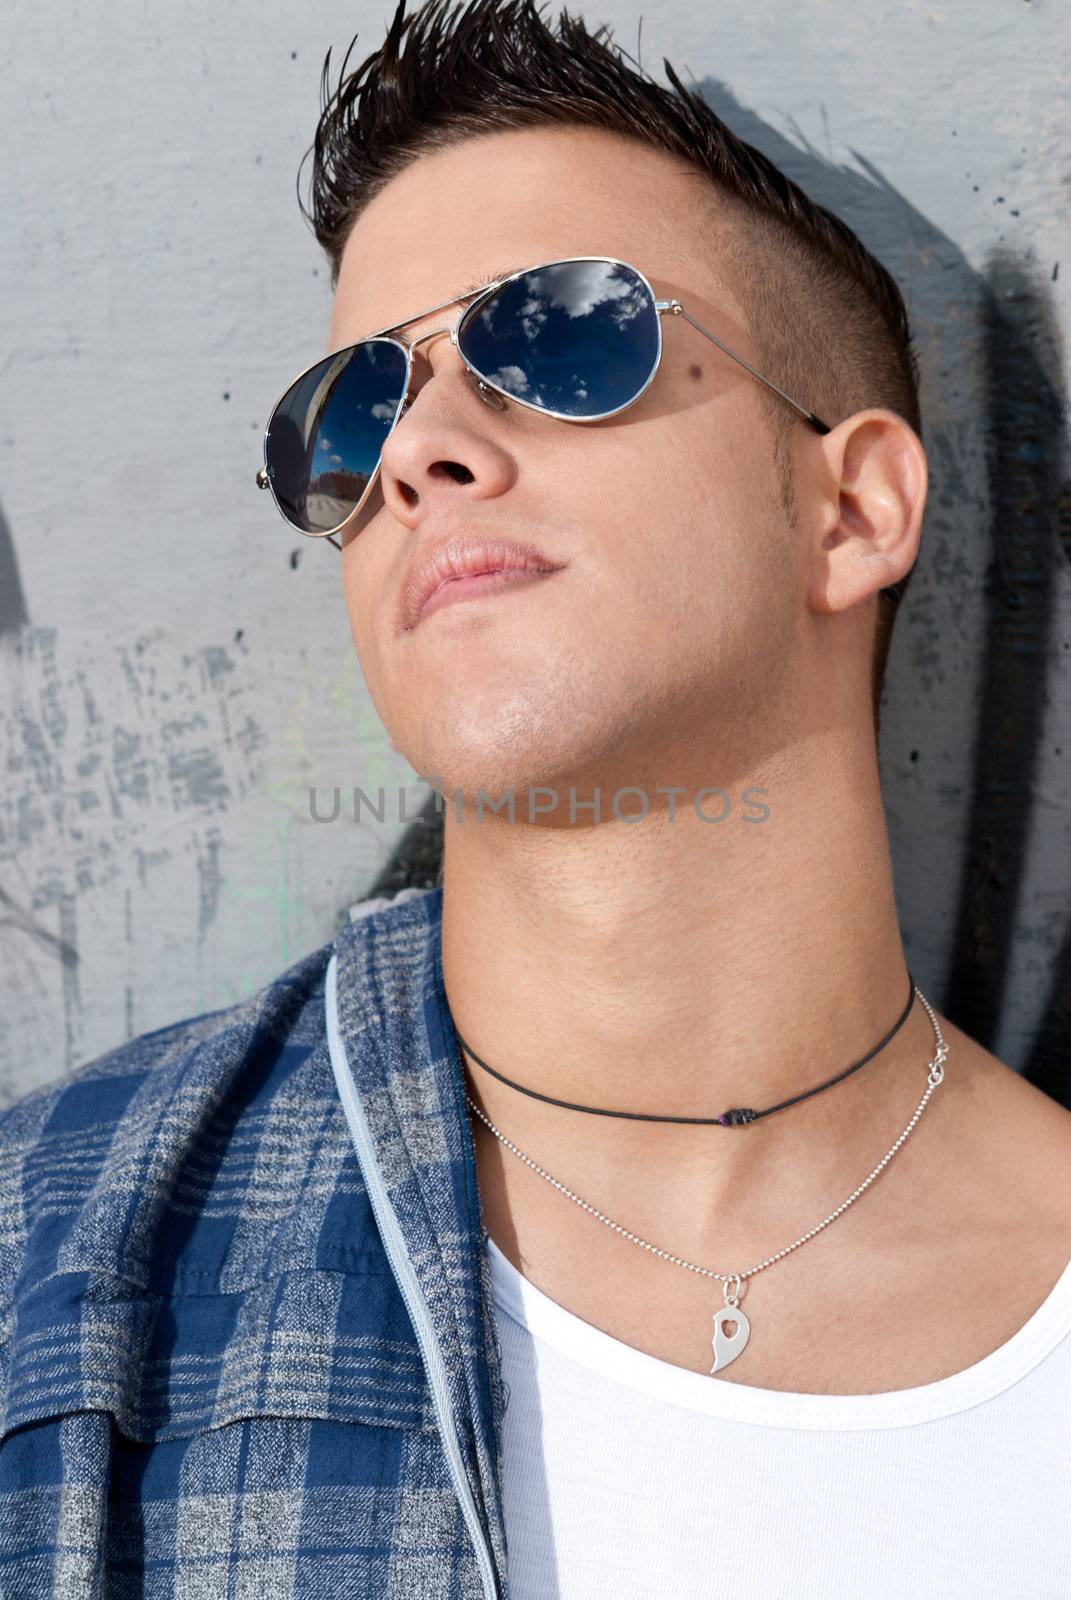 young male urban fashion sky on sunglasses over wall by dgmata